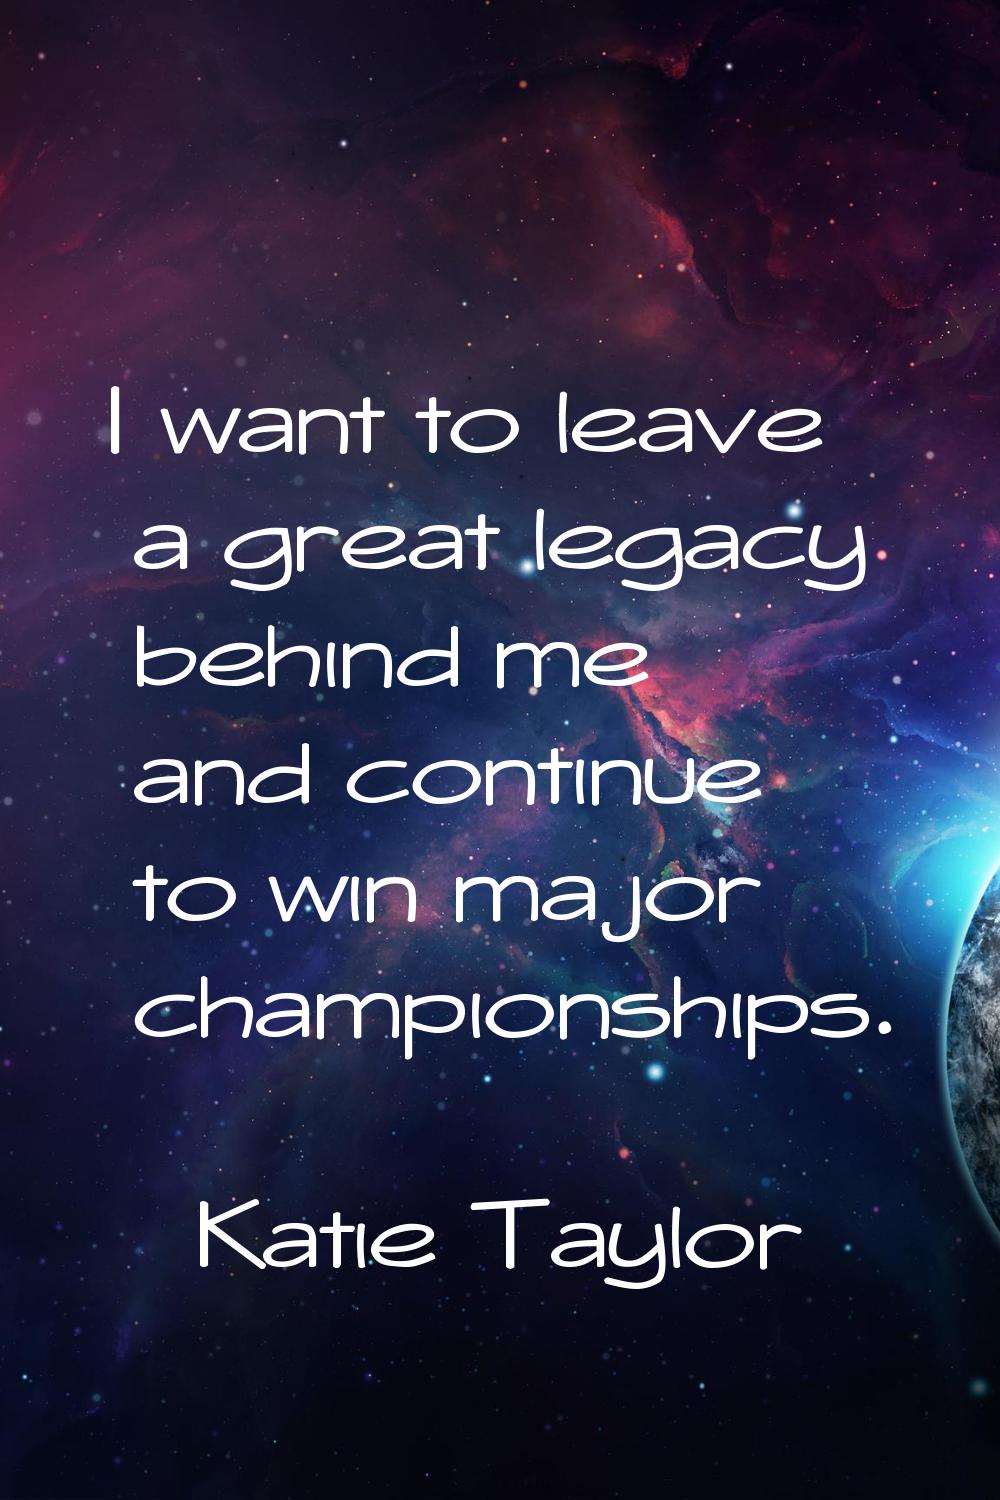 I want to leave a great legacy behind me and continue to win major championships.